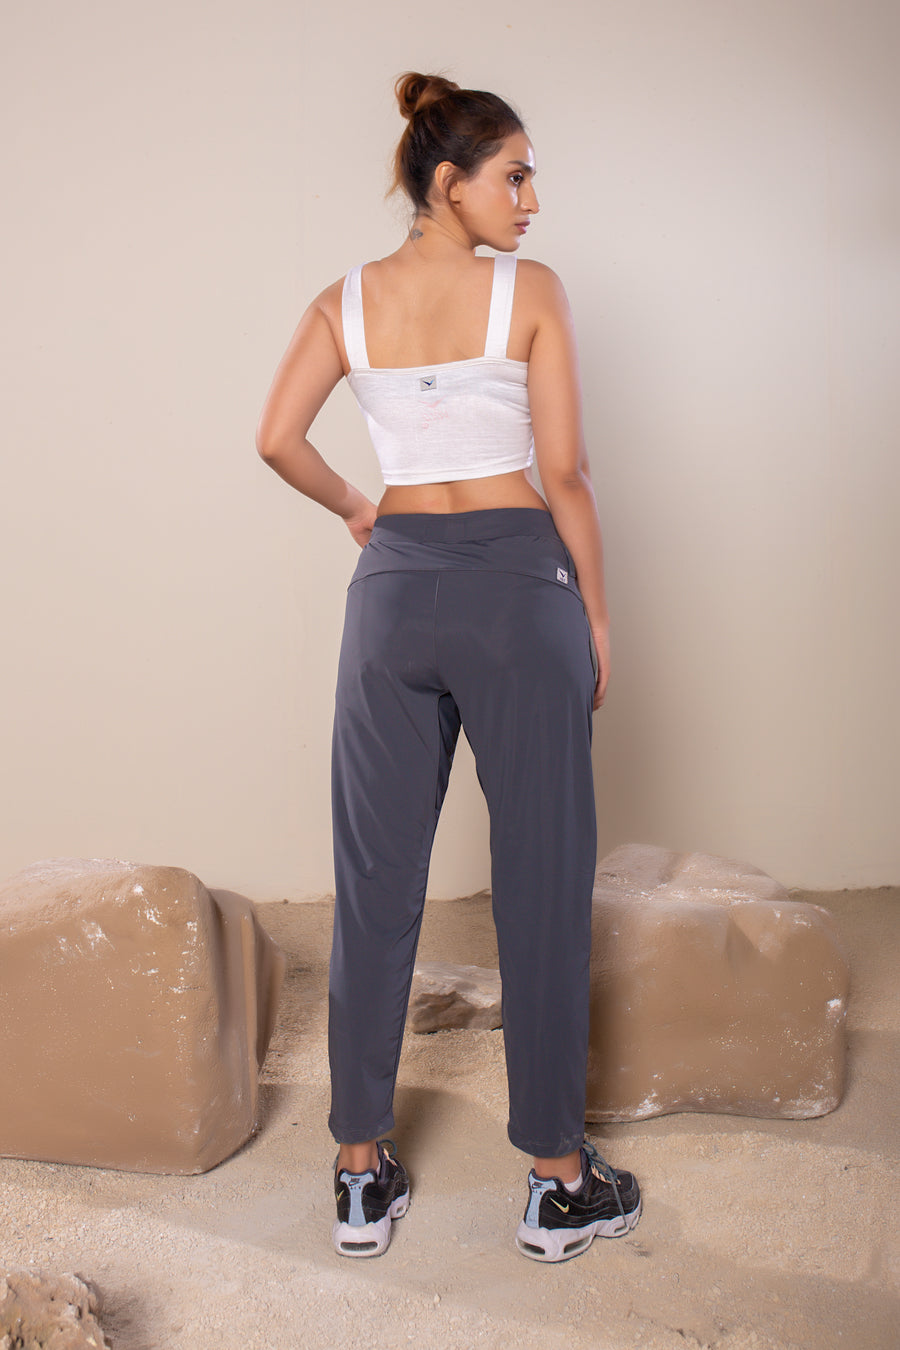 Women's Vera Crop in Off White | VOLO Apparel | The perfect athletic crop top made with a four way stretch bamboo fiber blend. Double lined and naturally odor resistant and antimicrobial. The Vera bamboo crop is reinforced stitched, the bamboo fiber comes with its own climate control properties, making the tops more breathable in the heat and more insulating in the cold.